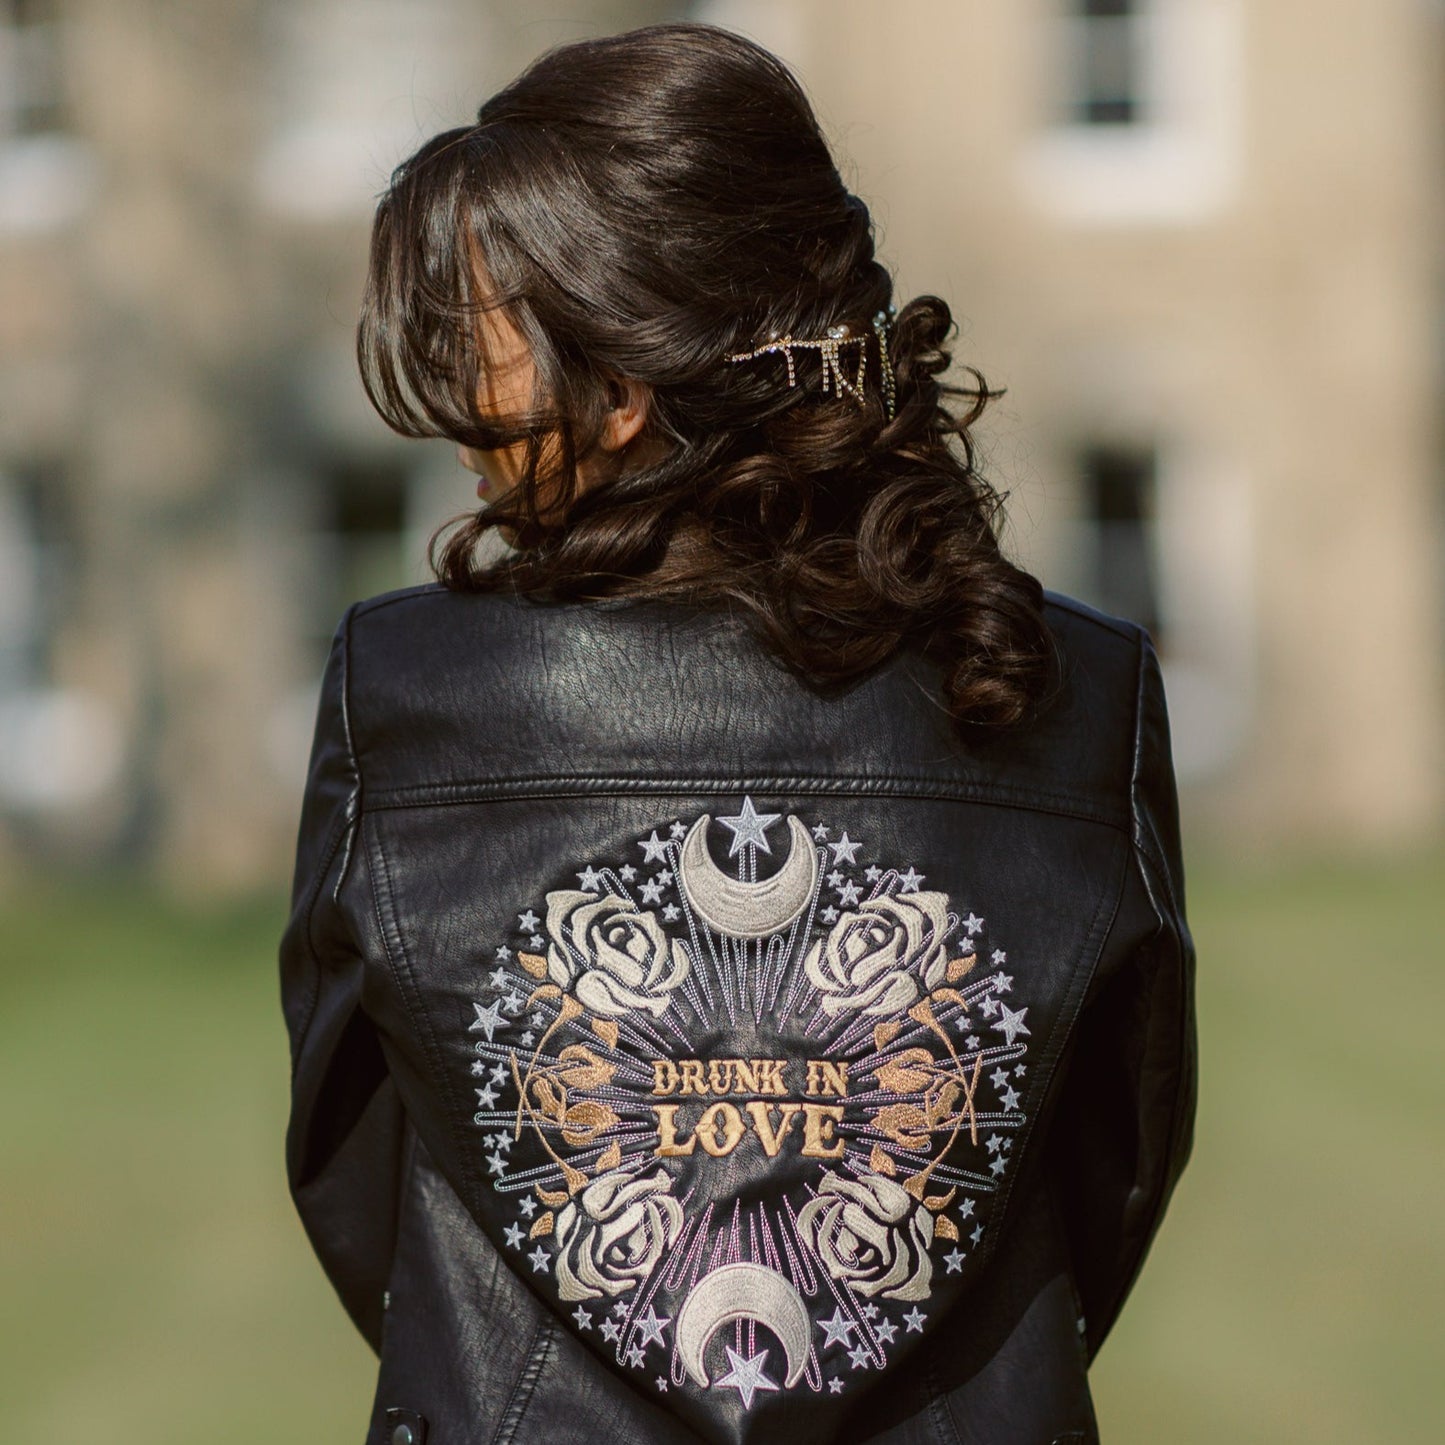 Drunk in Love Bridal Cover-Up – a fashionable black leather jacket for a modern and romantic wedding look